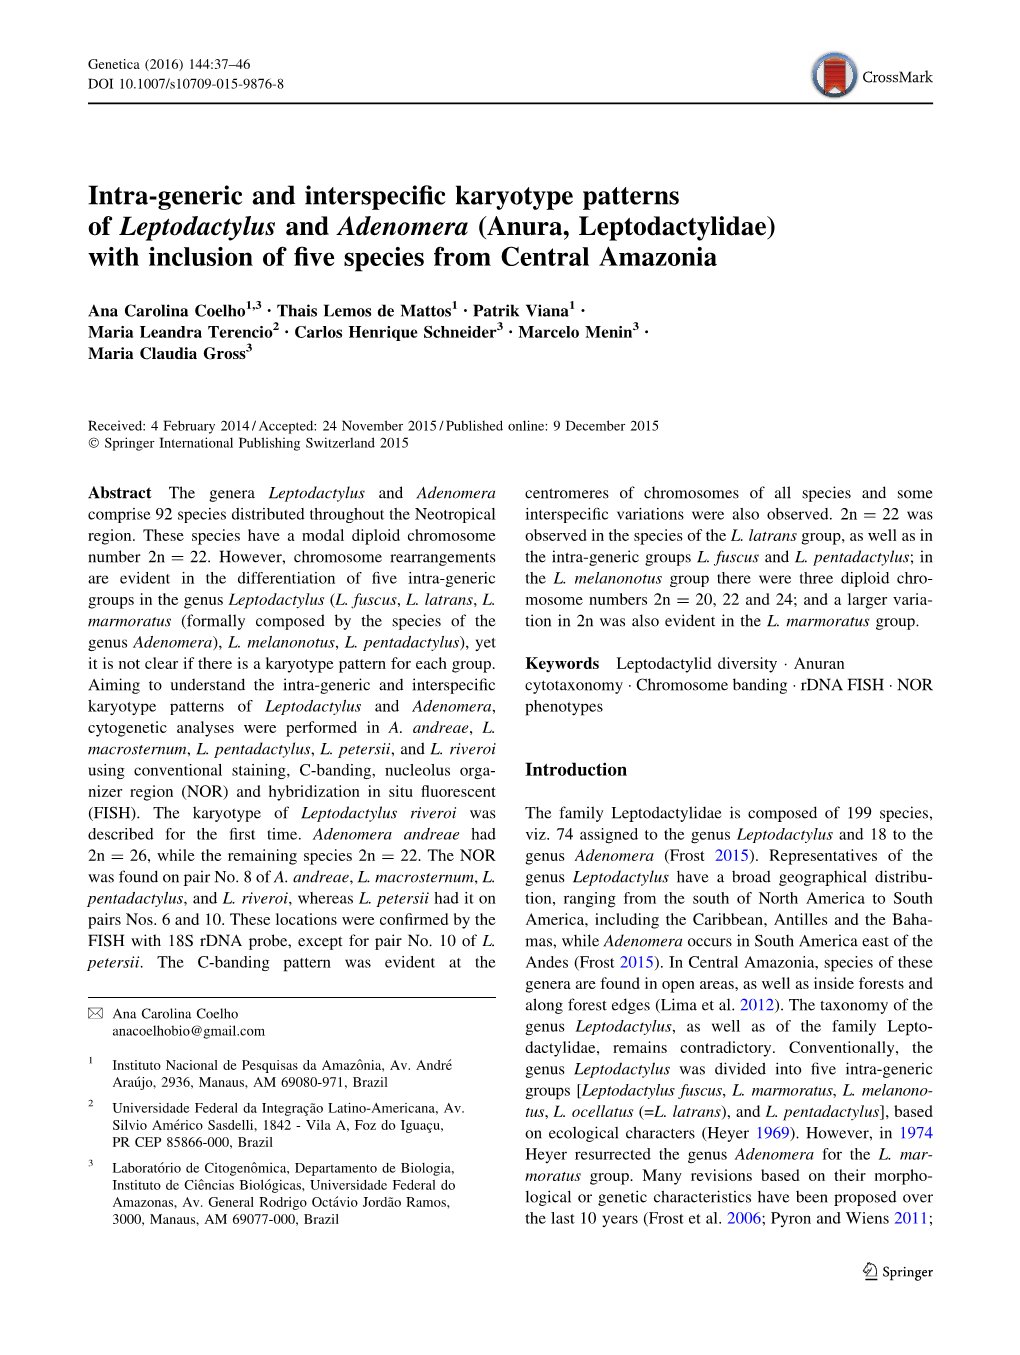 Intra-Generic and Interspecific Karyotype Patterns of Leptodactylus